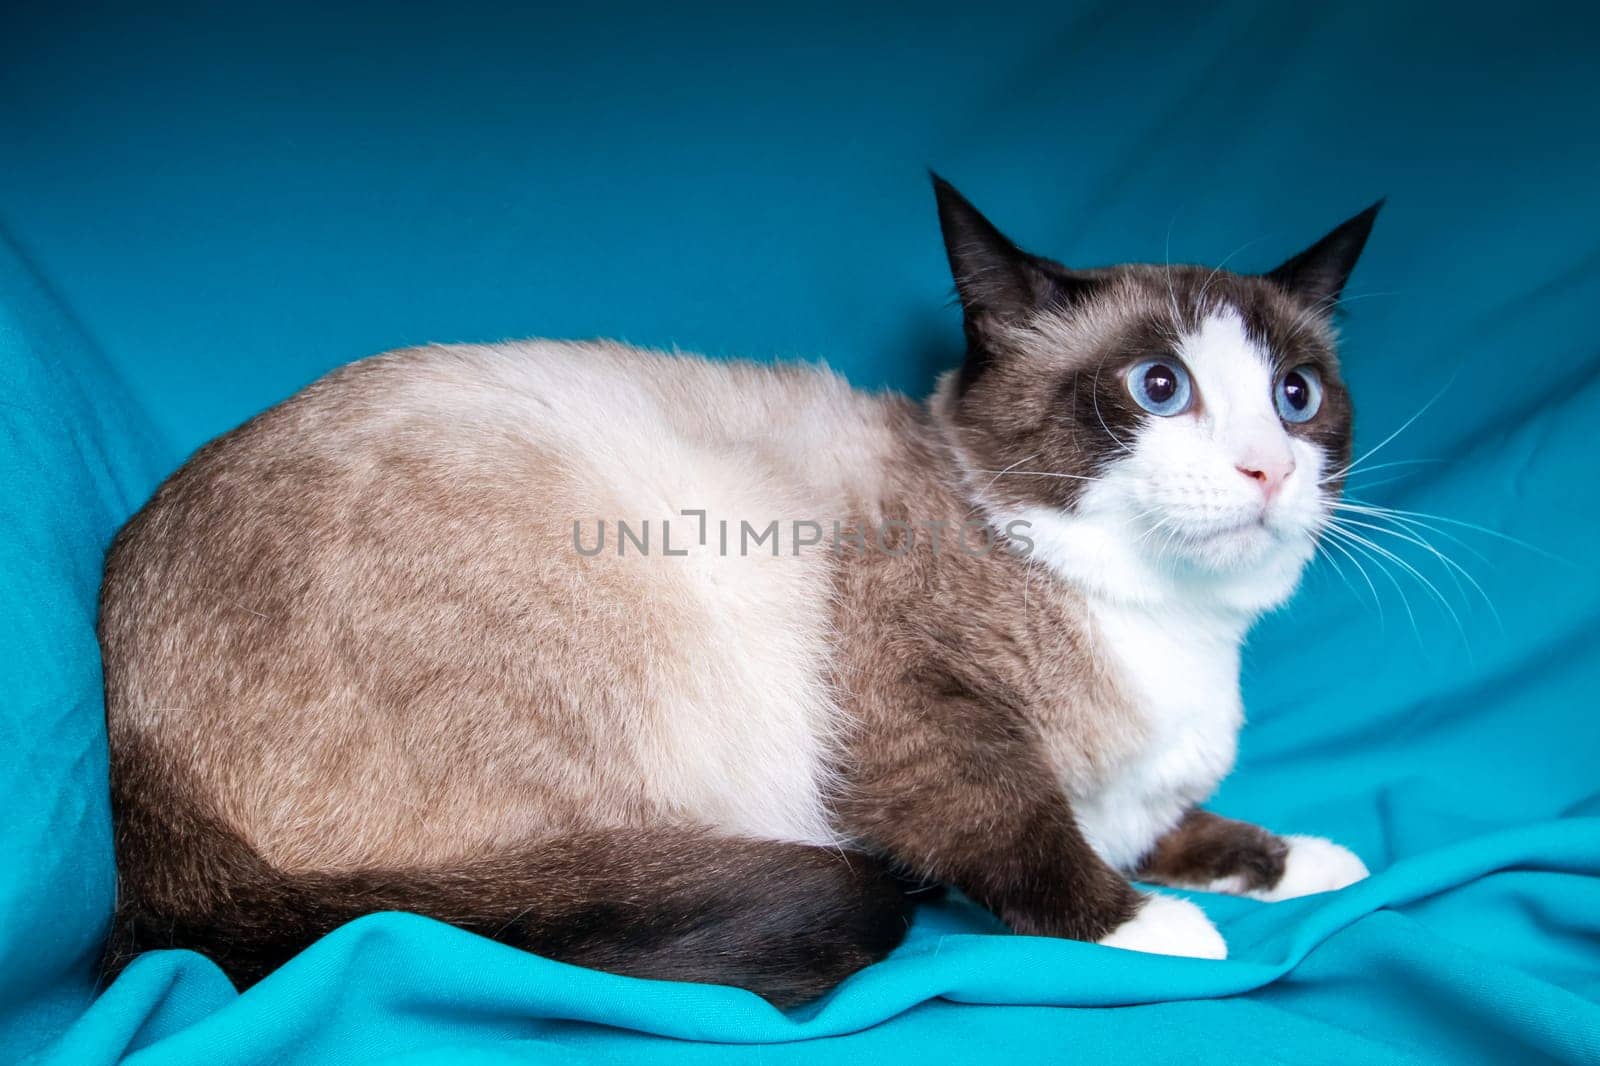 Gray cat with blue eyes portrait on blue background by Vera1703